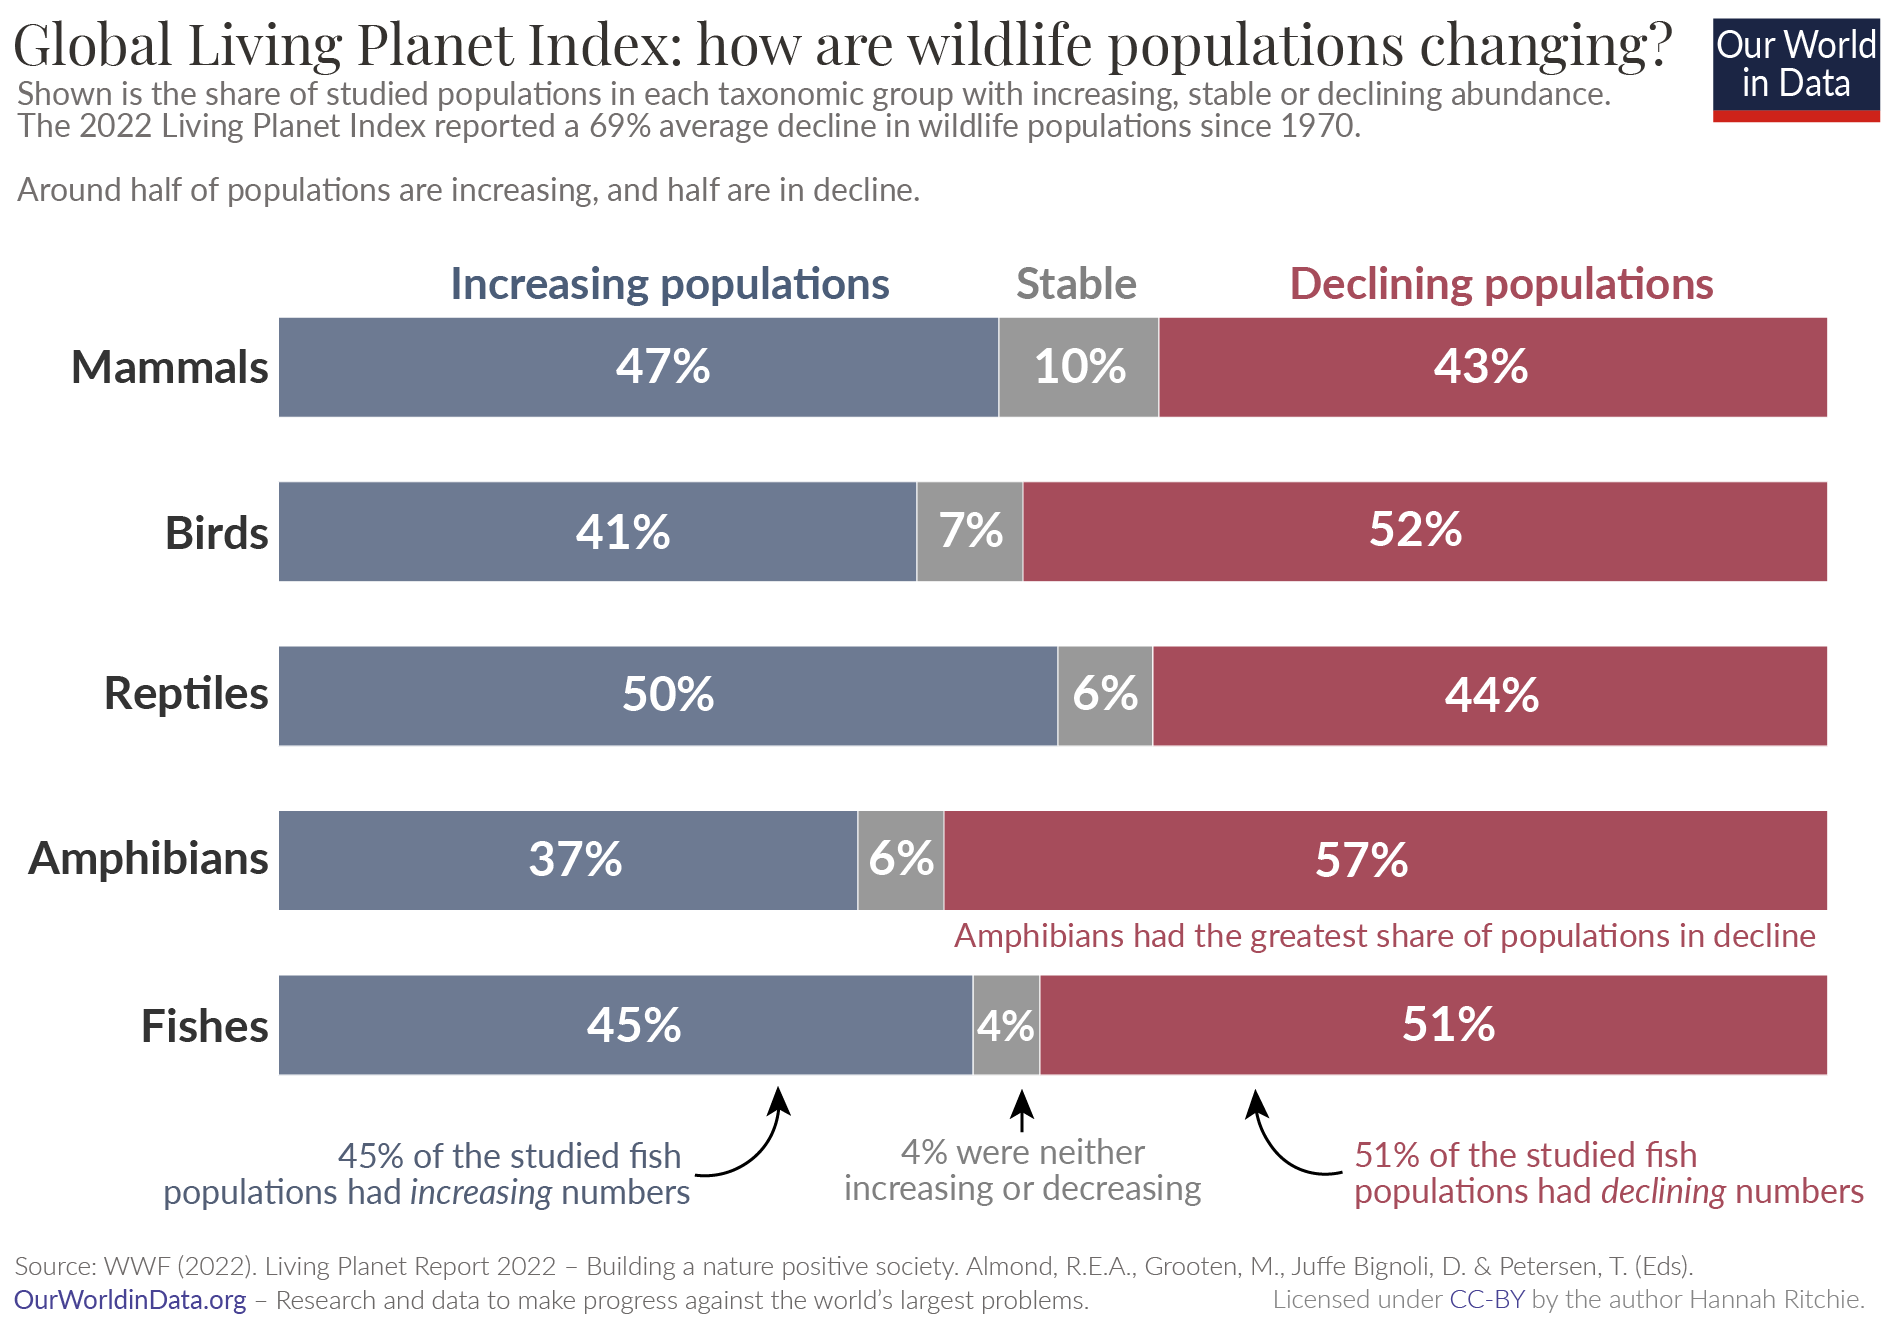 Share of populations increasing and declining living planet index